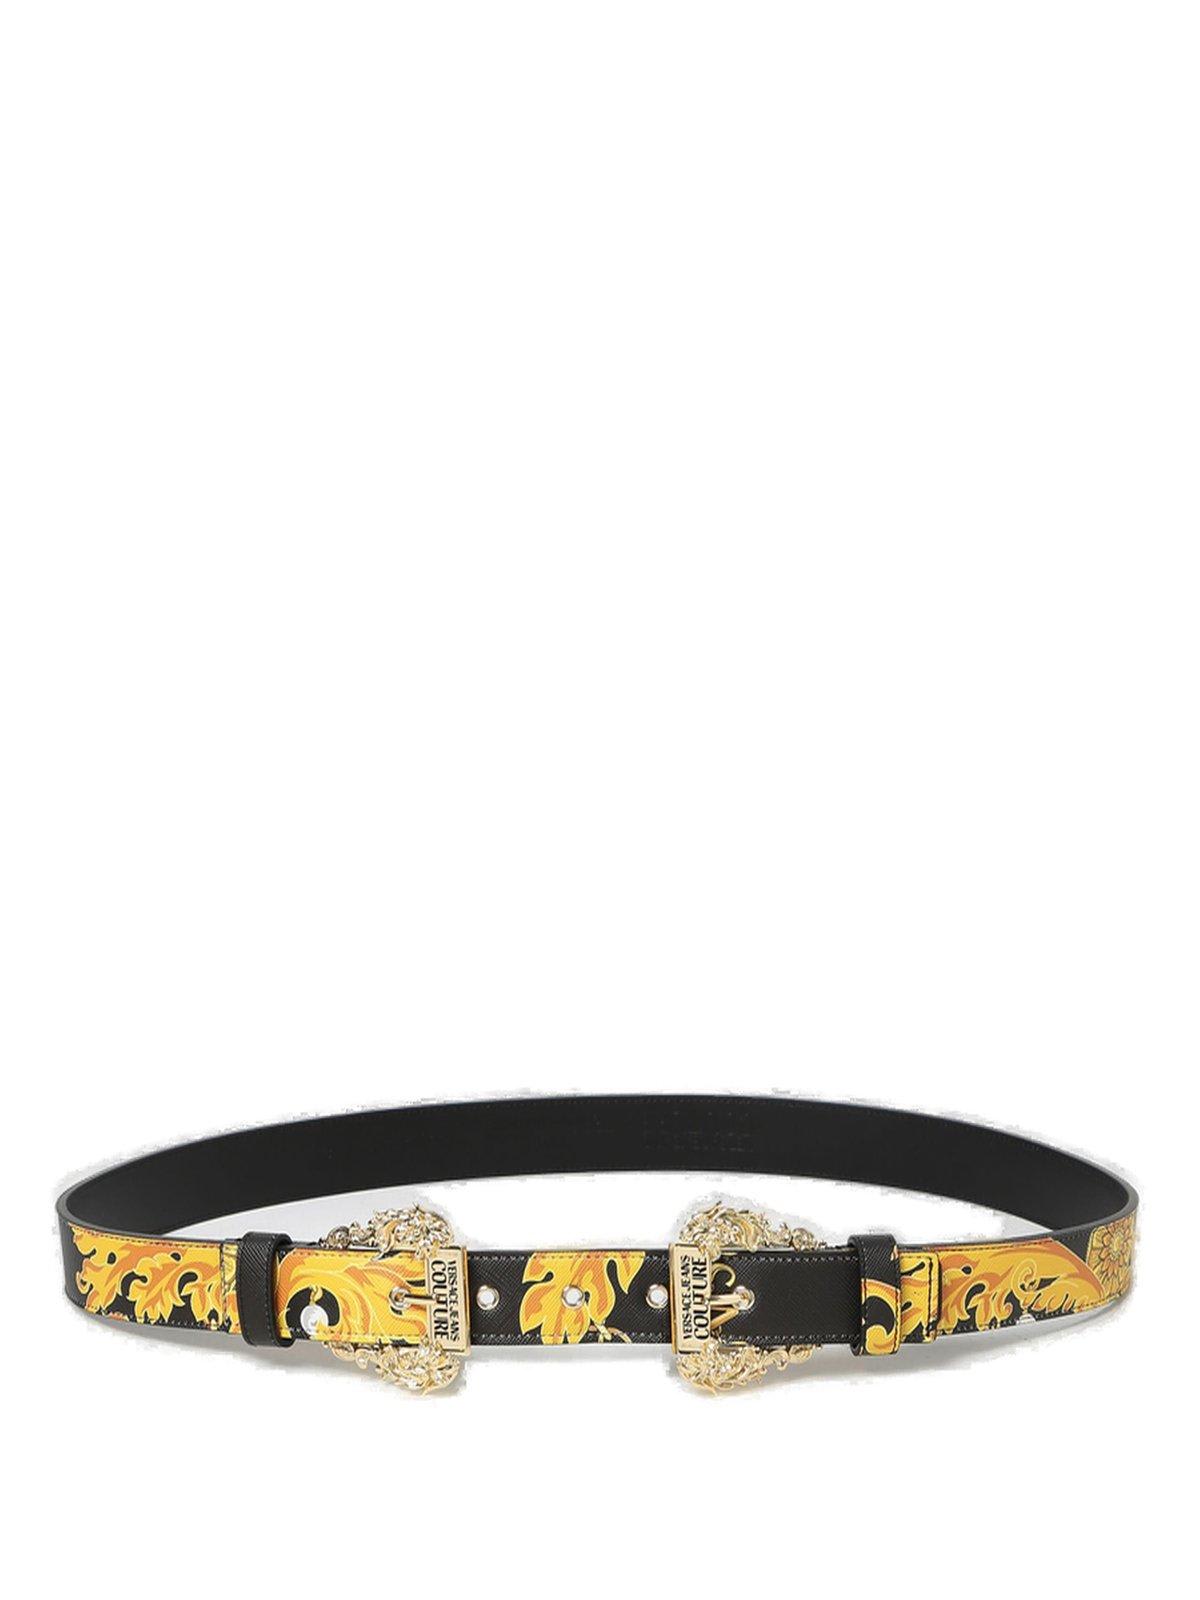 VERSACE JEANS COUTURE BAROQUE PATTERNED BUCKLE BELT VERSACE JEANS COUTURE